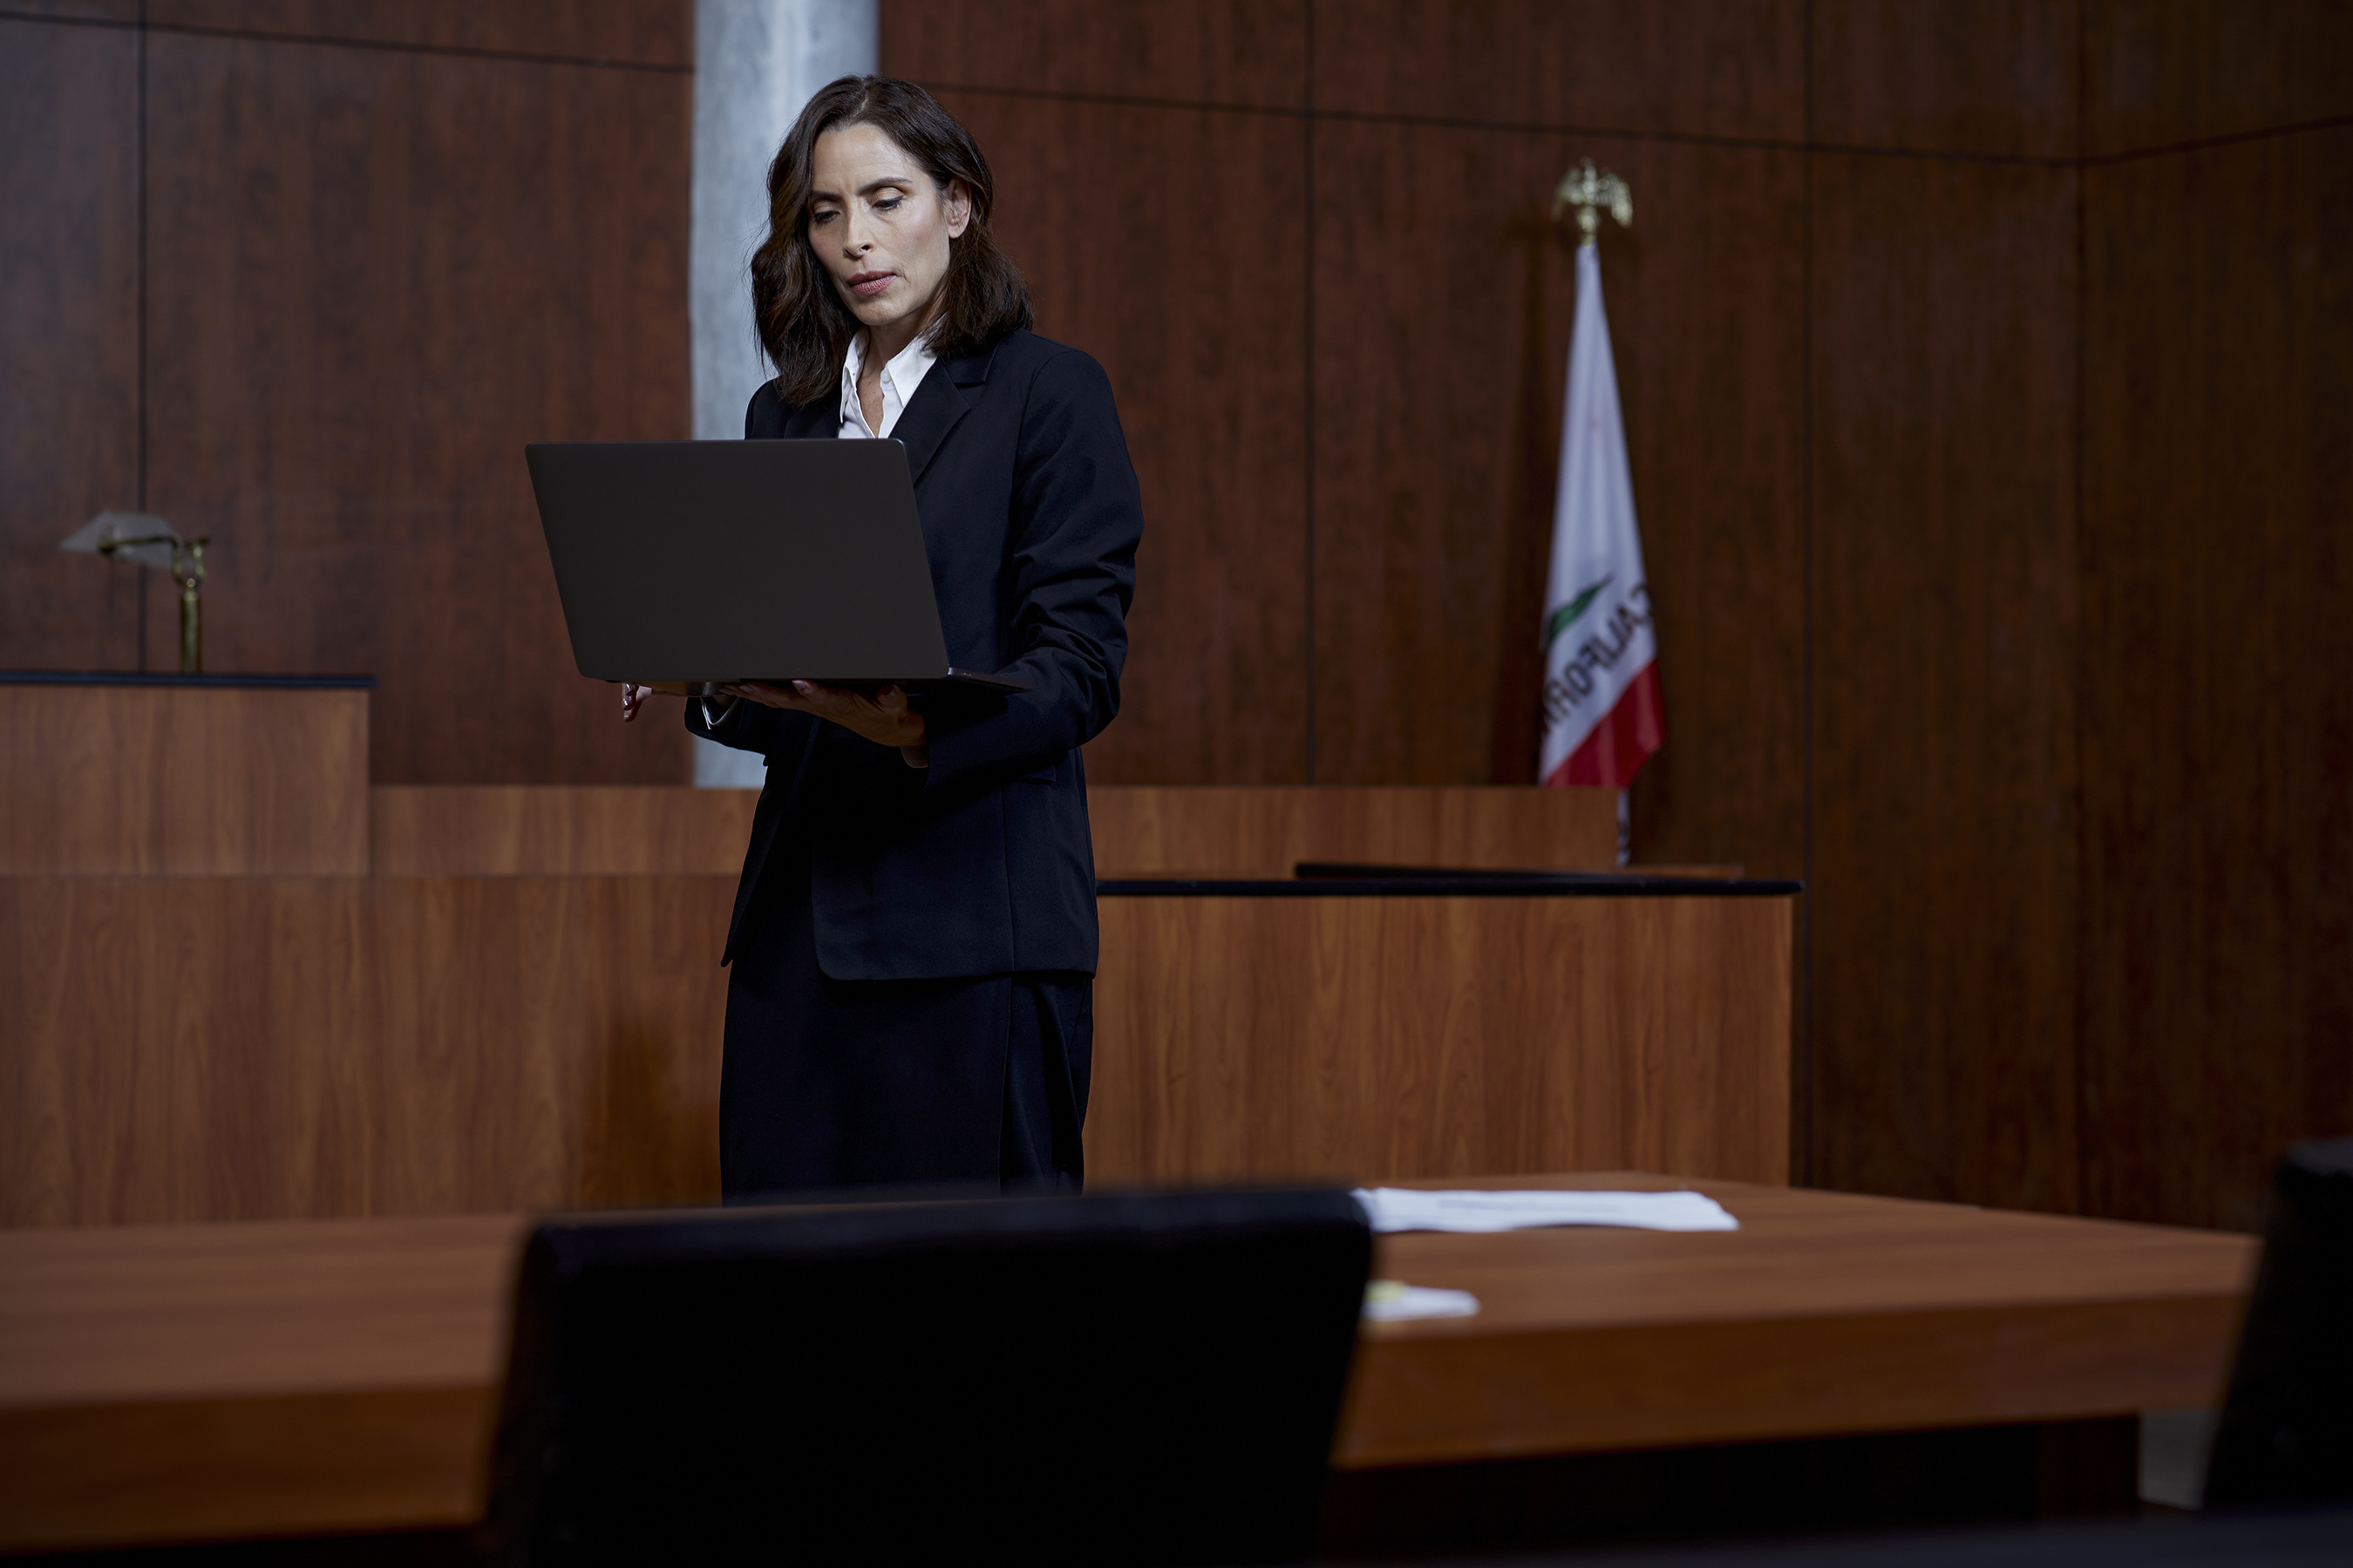 Axon Attorney Premier is the first digital evidence management system designed specifically for prosecutors and defense attorneys